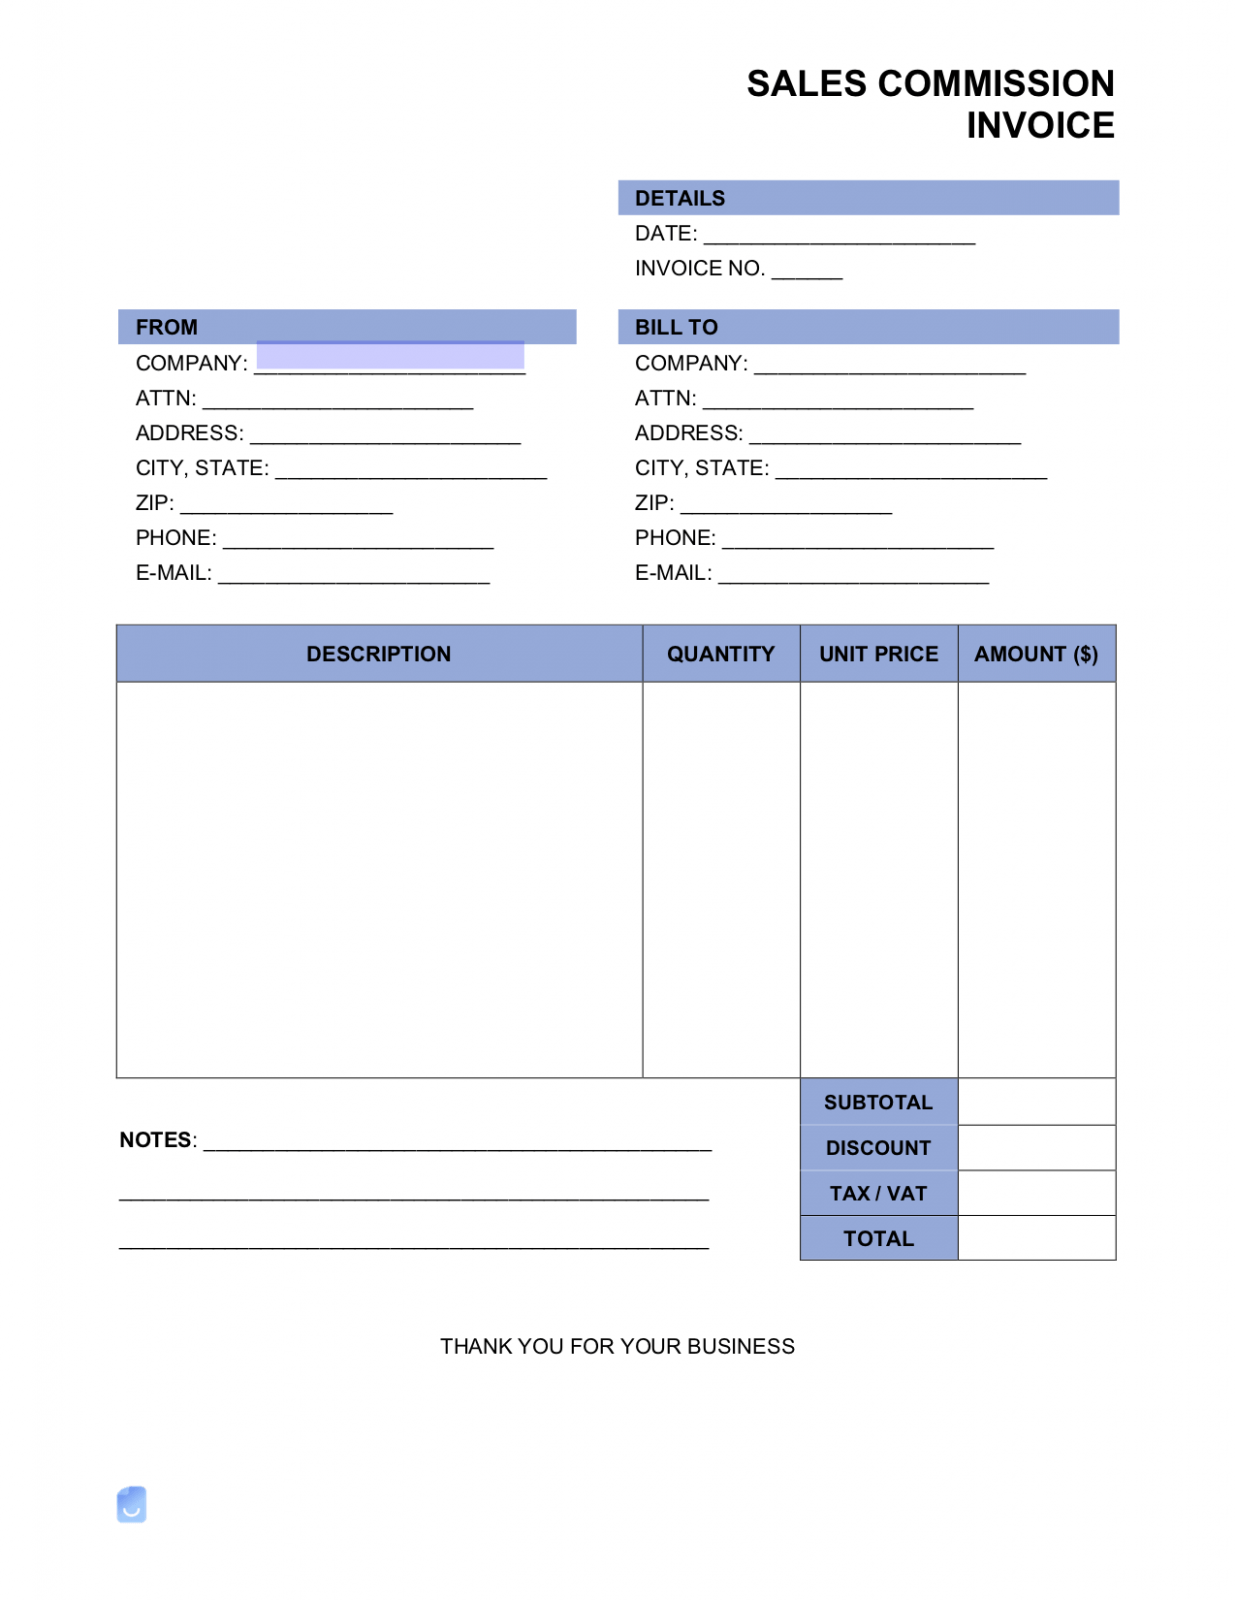 Sample Sales Commission Invoice Template Doc